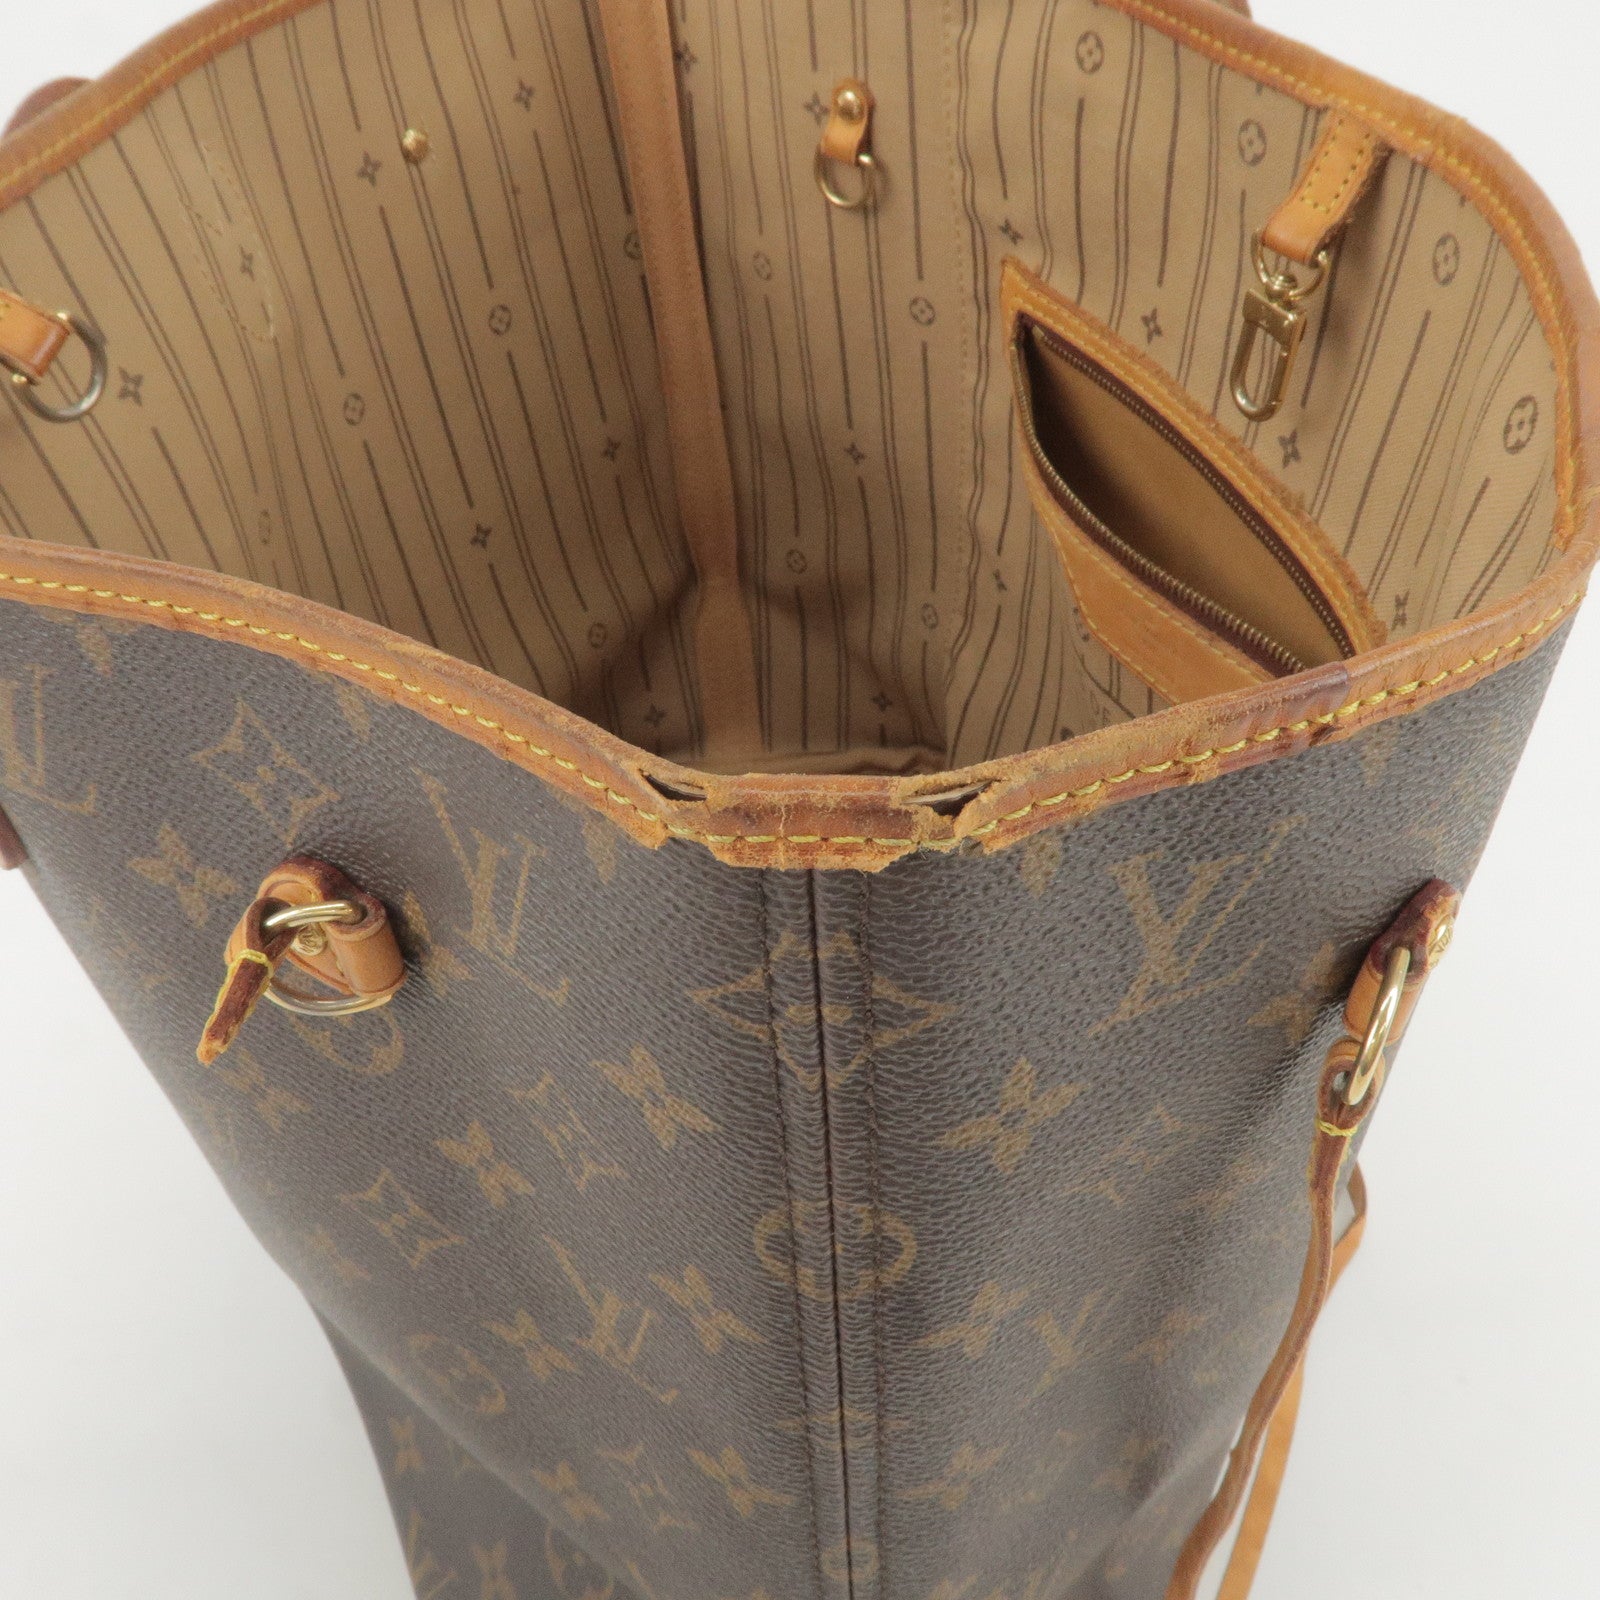 Louis Vuitton 2010 pre-owned Neverfull GM tote bag